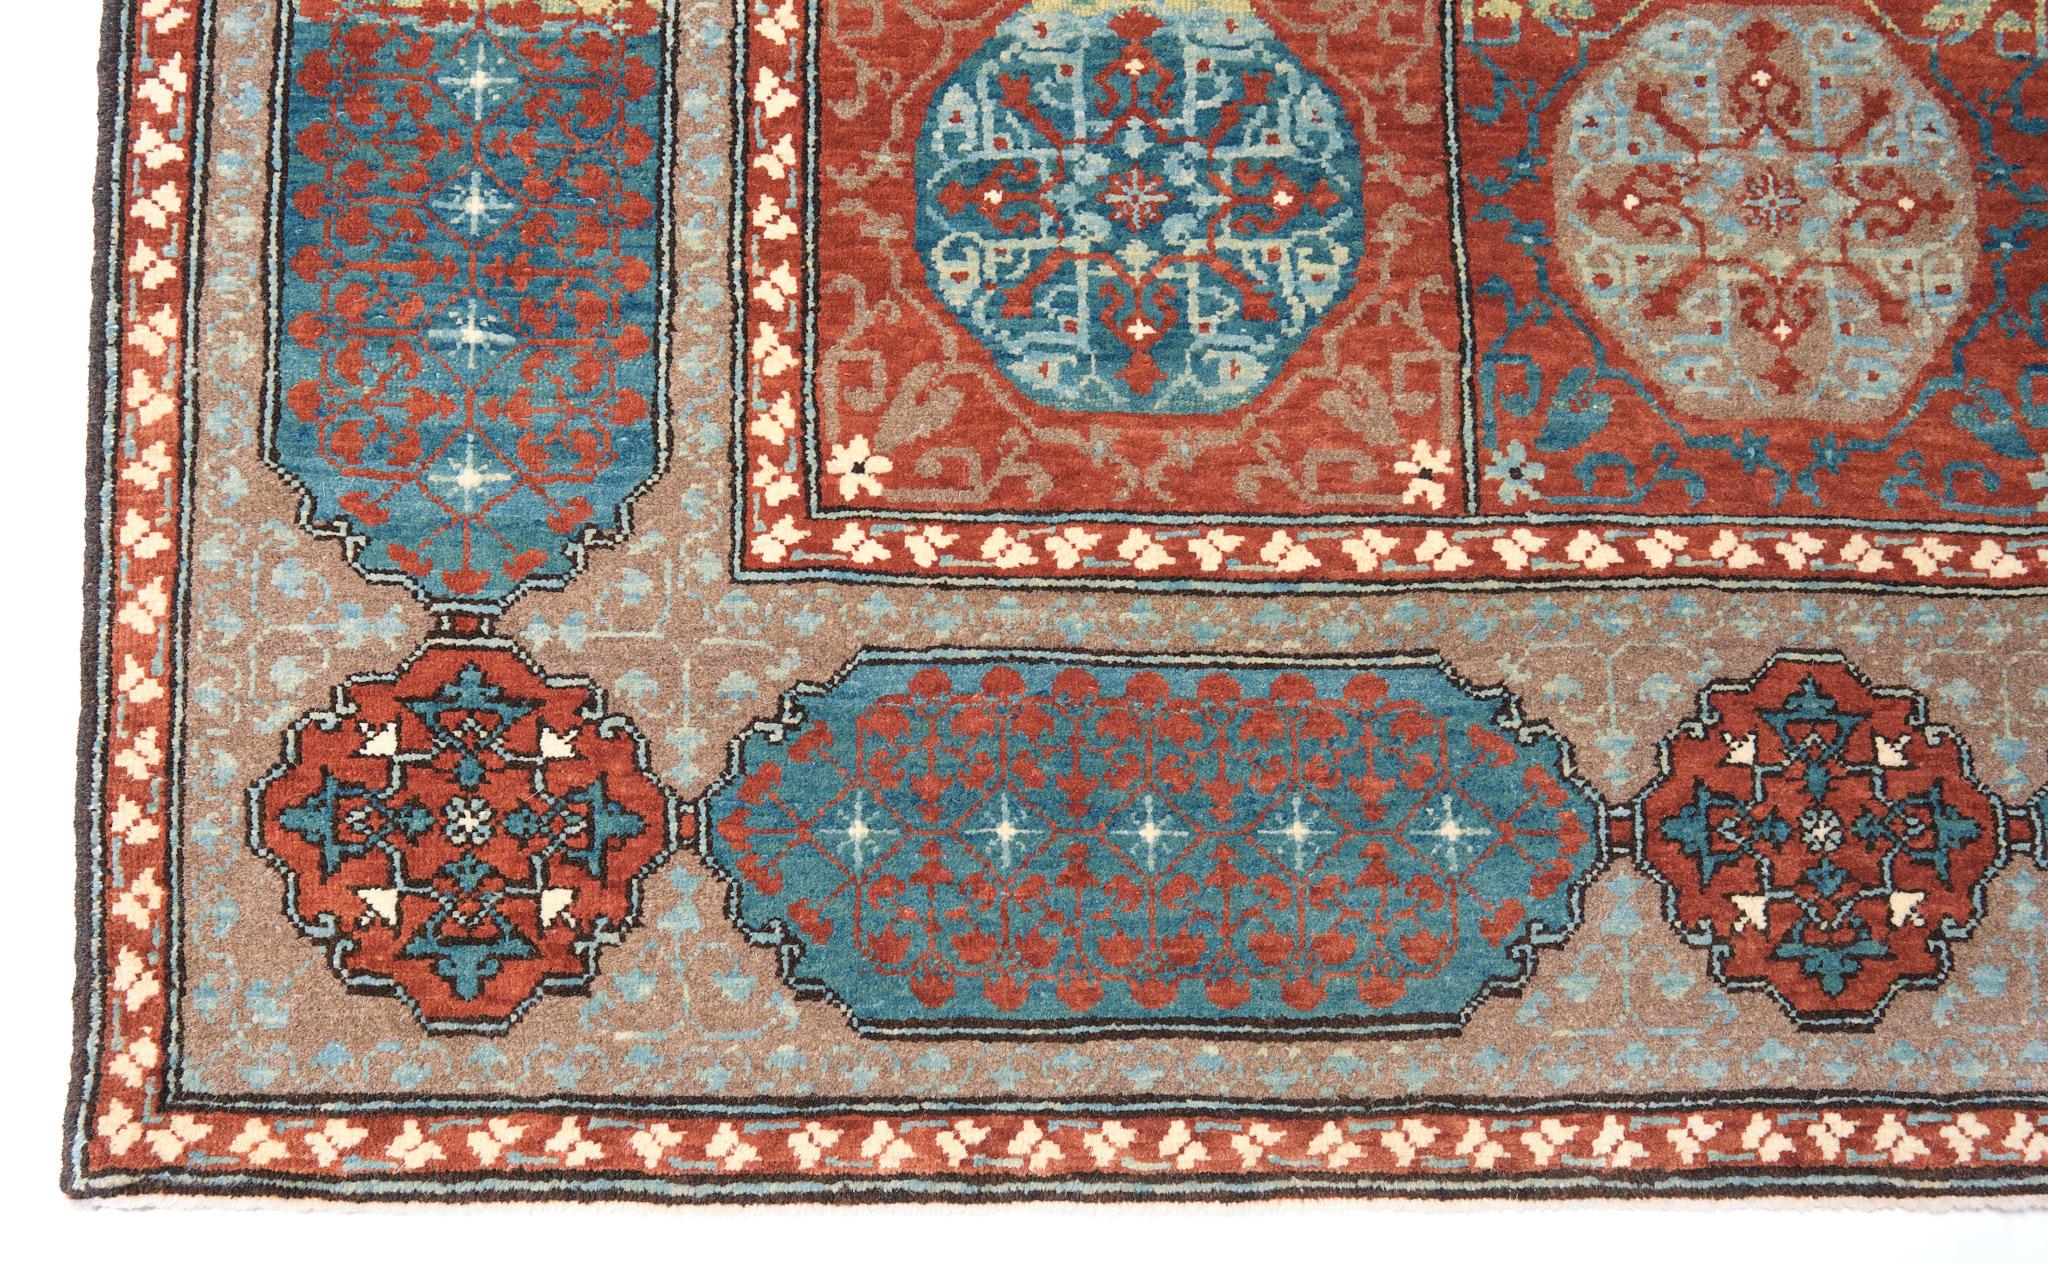 The source of carpet comes from the book How to Read – Islamic Carpets, Walter B. Denny, The Metropolitan Museum of Art, New York 2014 fig.61,62. The five-star-medallion carpet was designed in the early 16th century by Mamluk Sultane of Cairo,